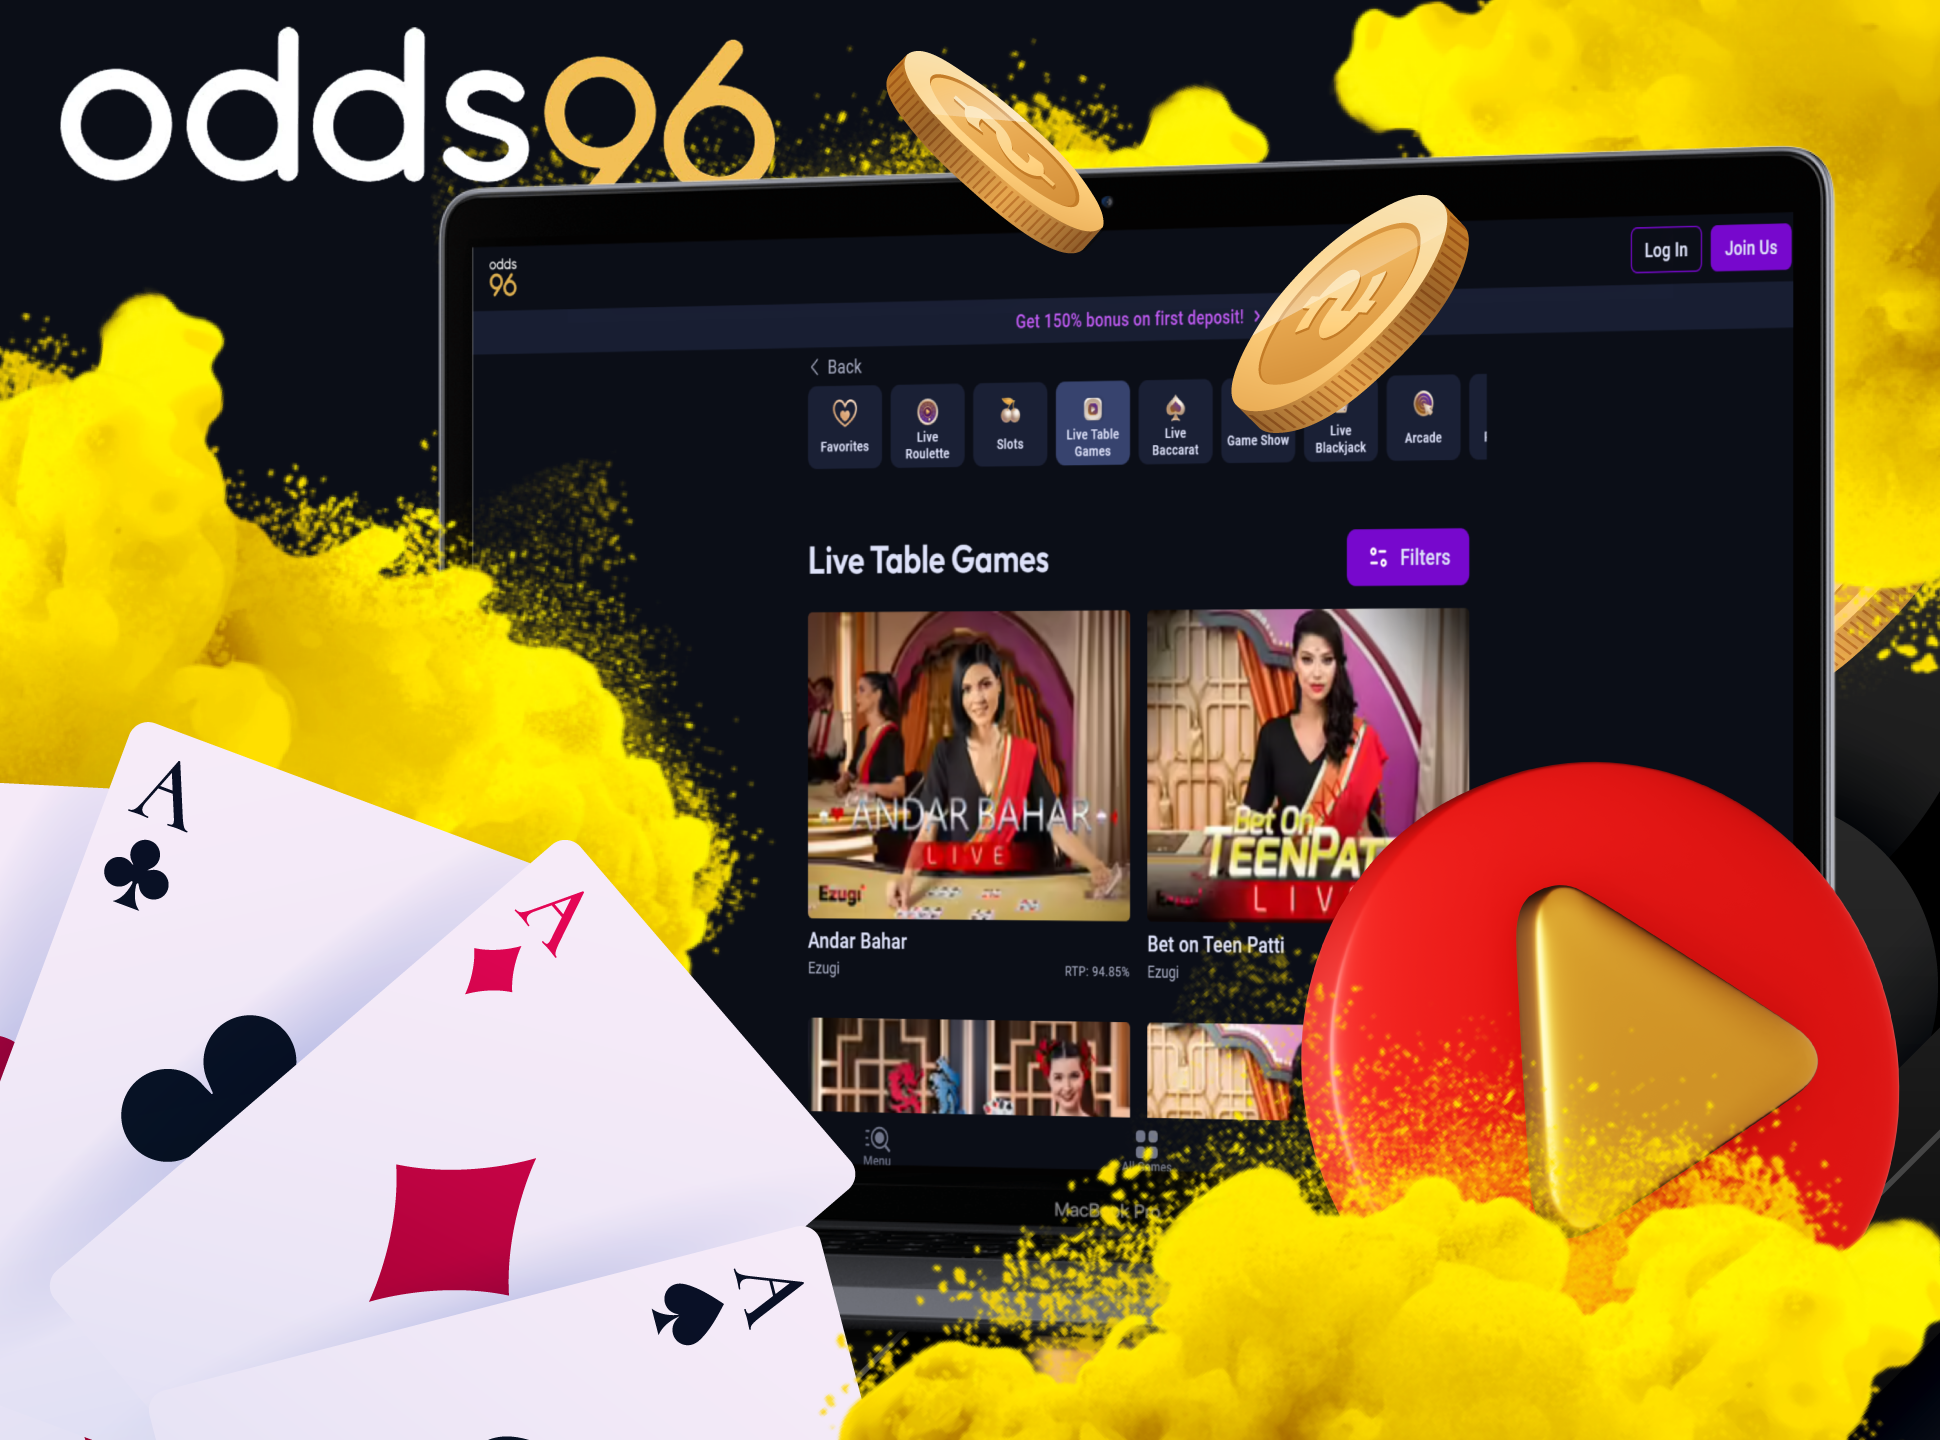 Play casino games with real people at Odds96.